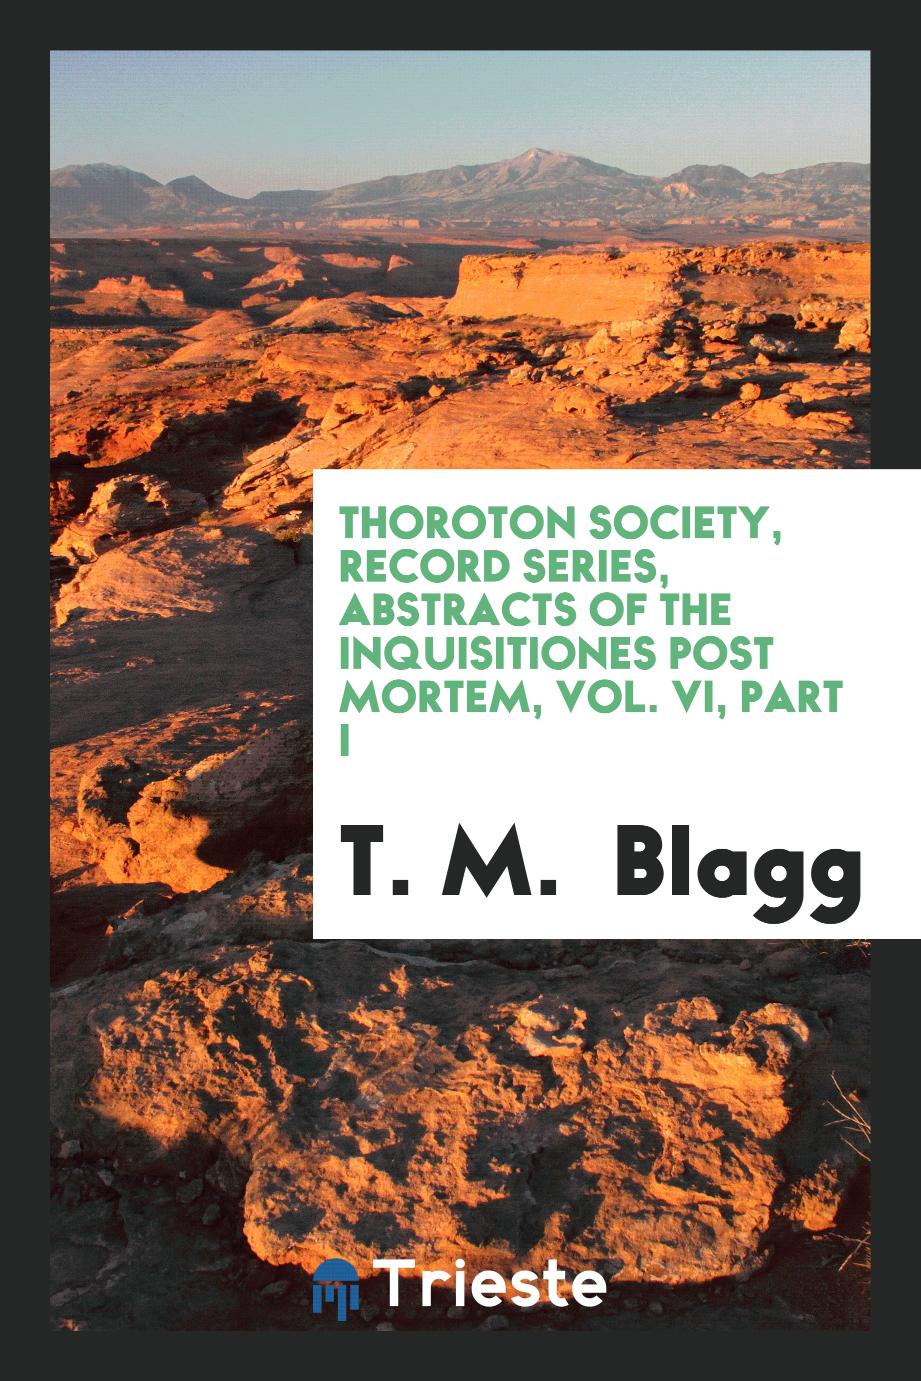 Thoroton Society, Record series, Abstracts of the Inquisitiones post mortem, Vol. VI, Part I